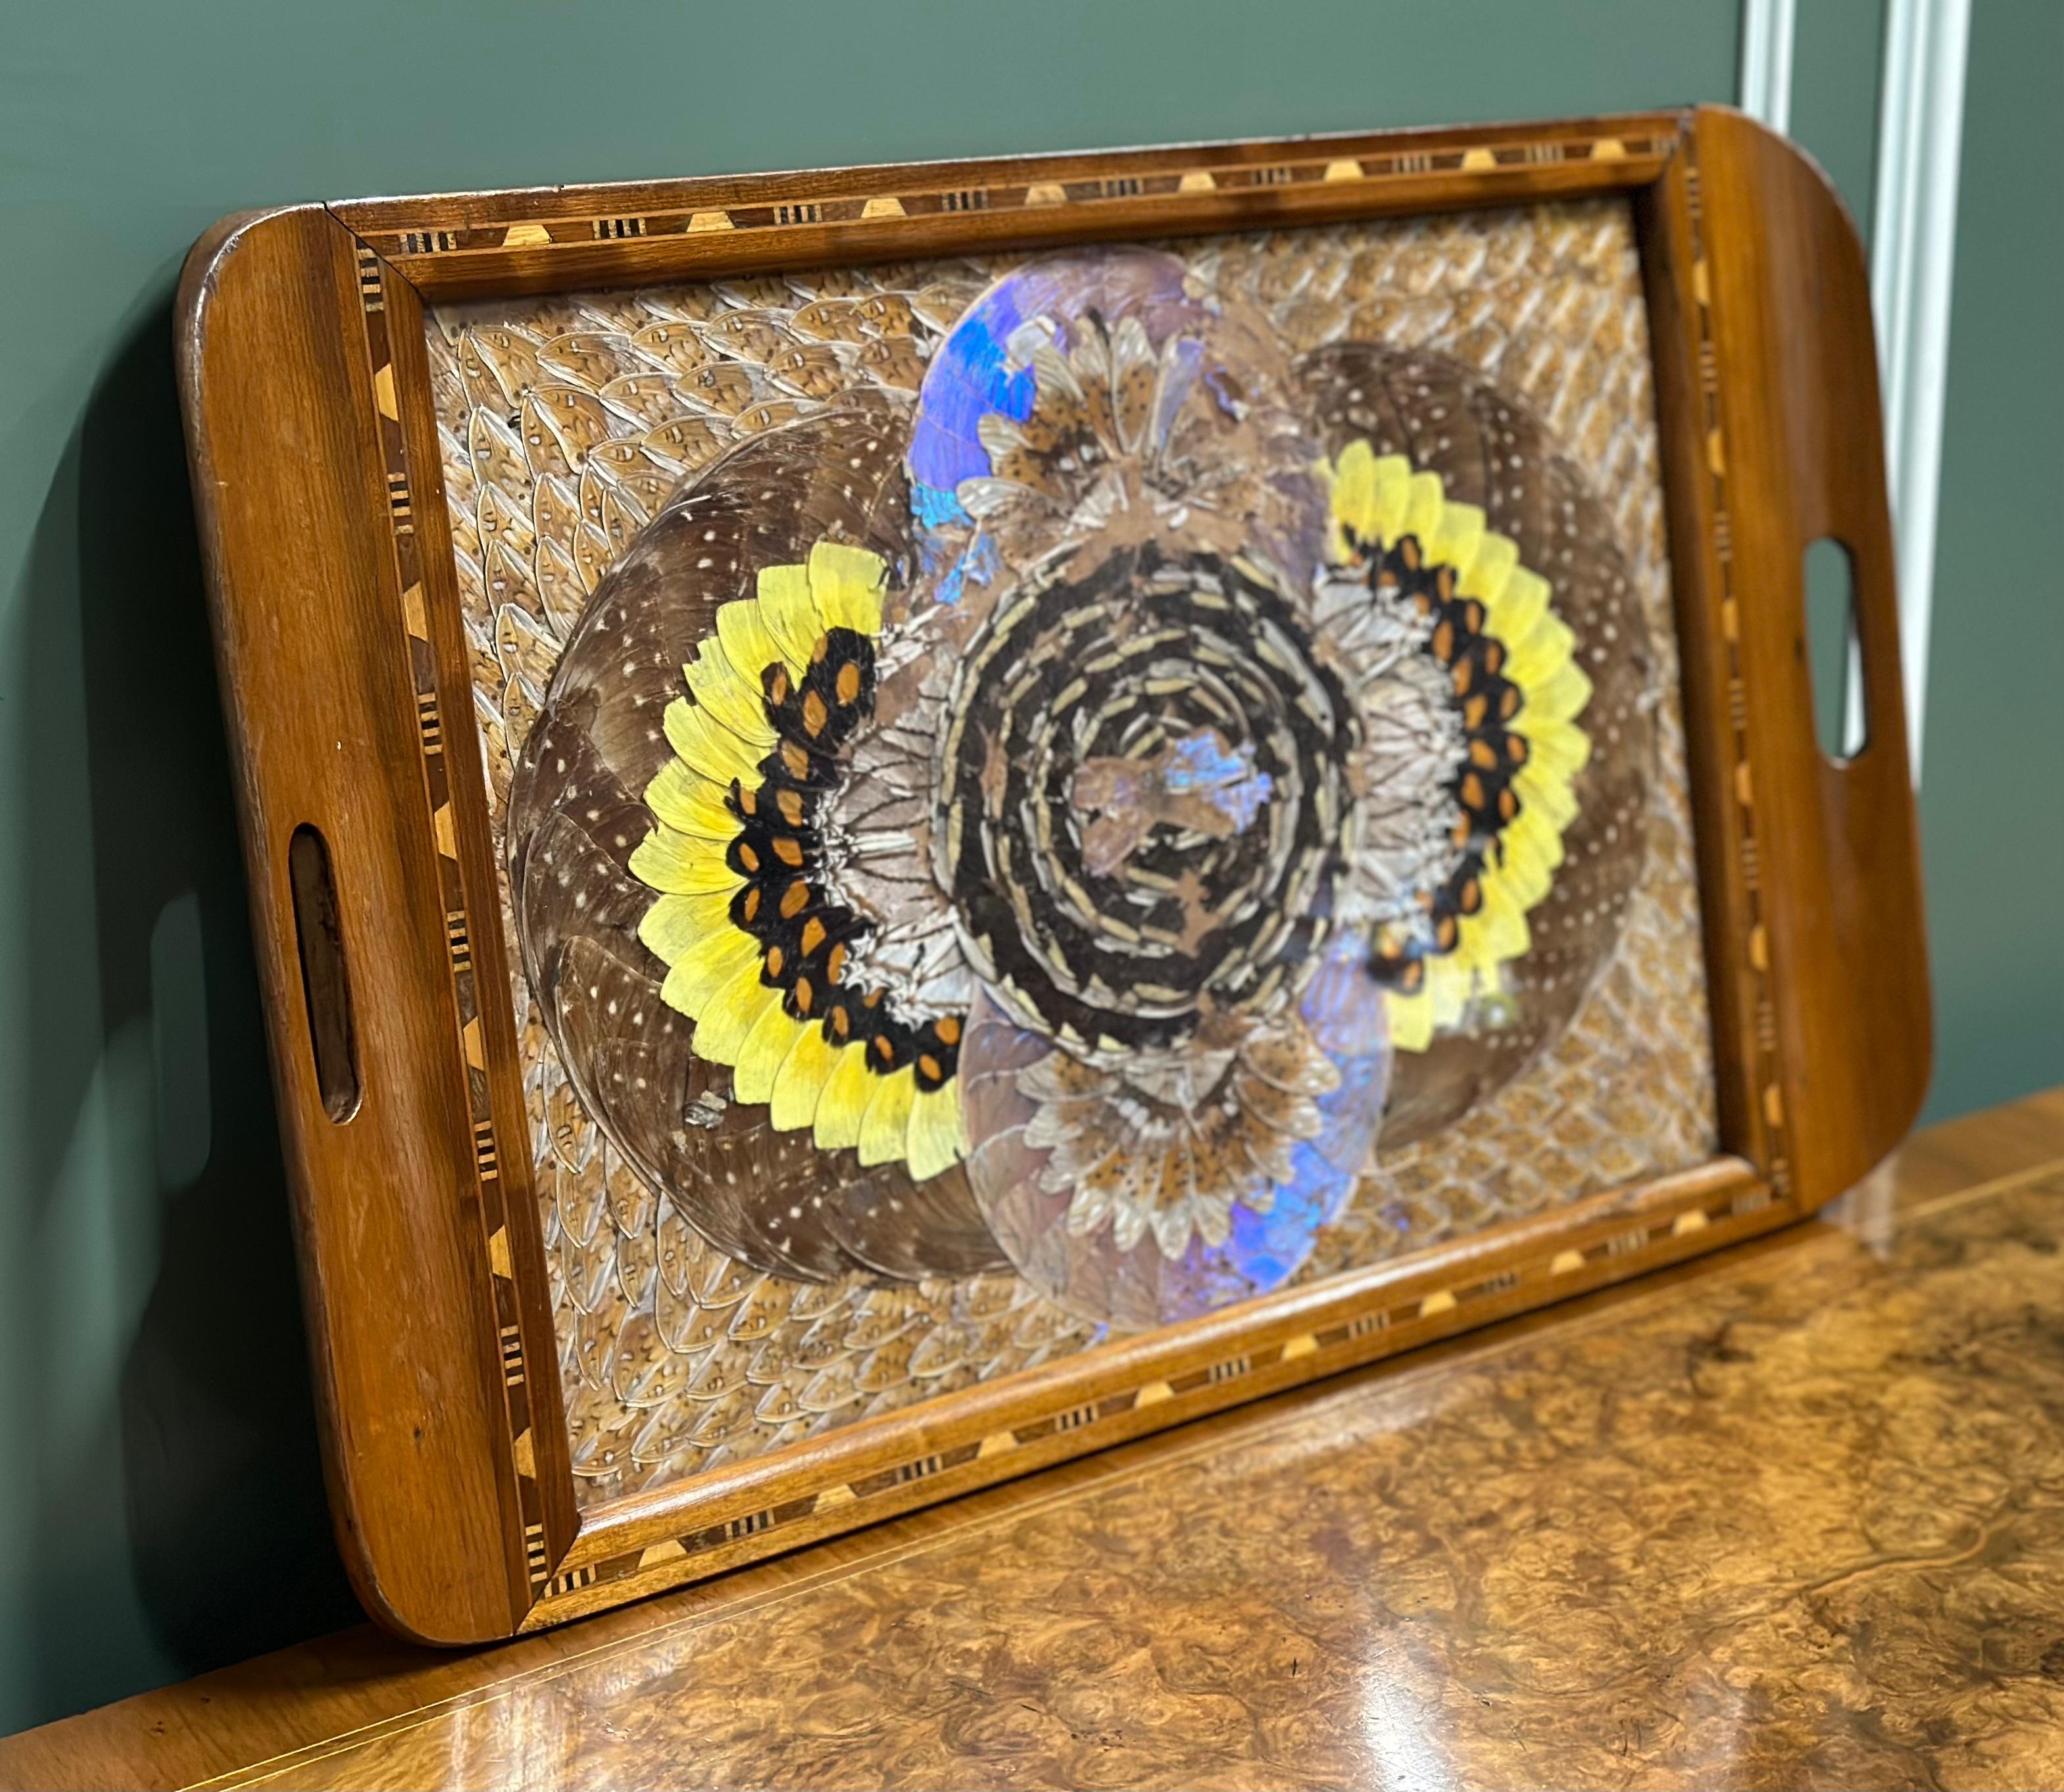 
We are excited to present this vintage Brazilian inlaid wood tray with real Morpho butterfly wings.

This vintage tray features a geometric pattern made from the wings of the brilliant iridescent Blue Morpho butterfly.
Turn the tray and watch the